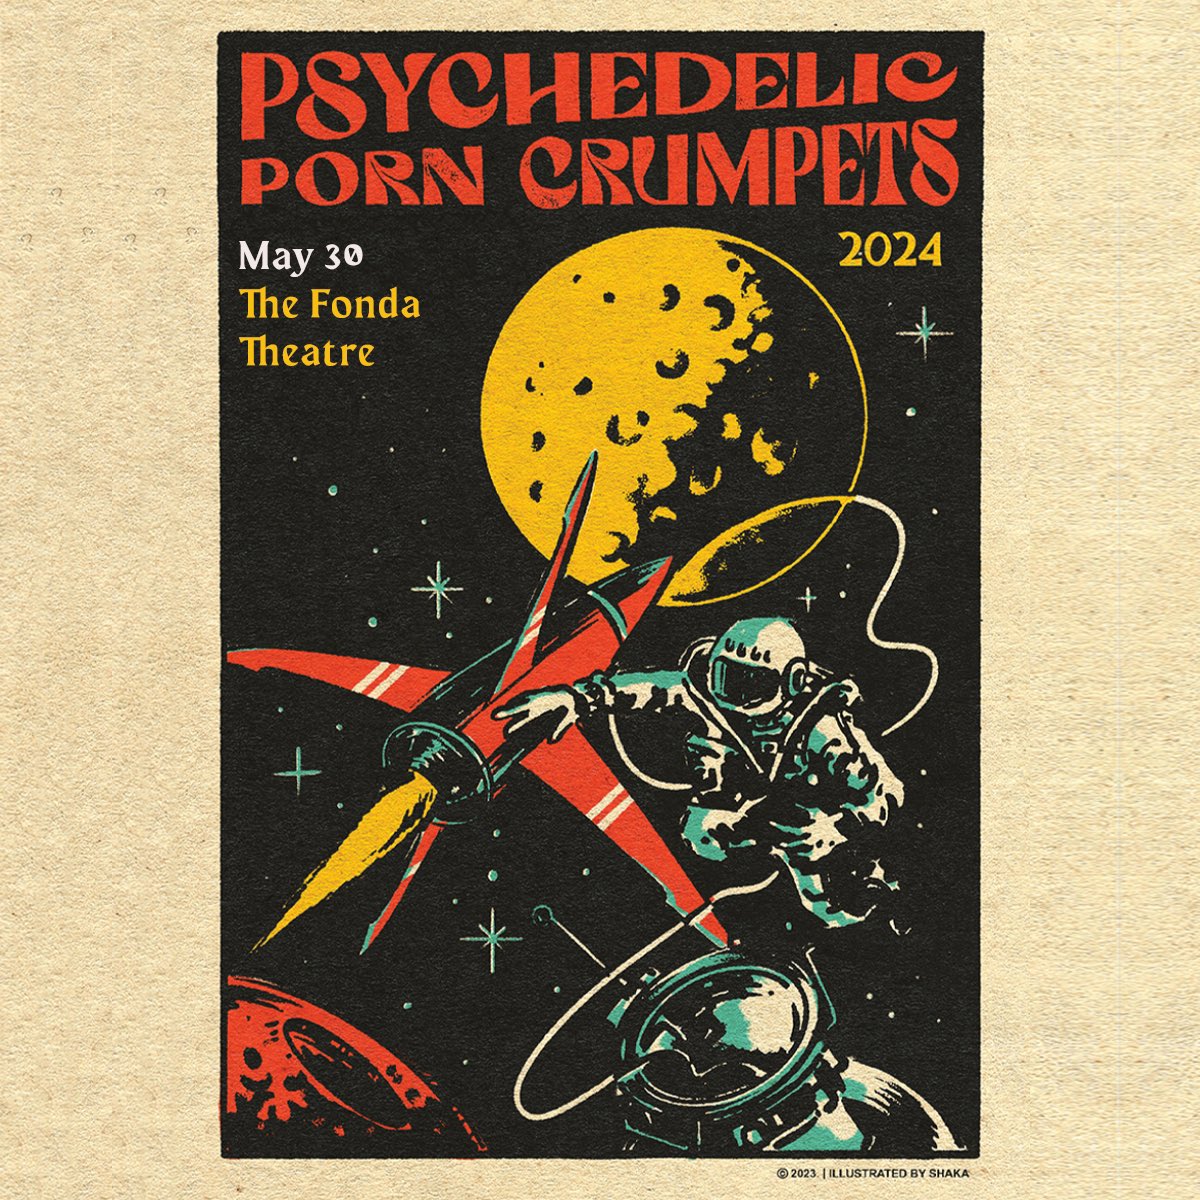 #giveaway Want a chance to WIN two tickets to see the #PsychedelicPornCrumpets on 5/30 at @FondaTheatre ? Sign up for our newsletter at the link here: arep.co/m/jitv-giveawa… to receive emails about this opportunity, as well as future giveaways. #jaminthevan #fondatheatre